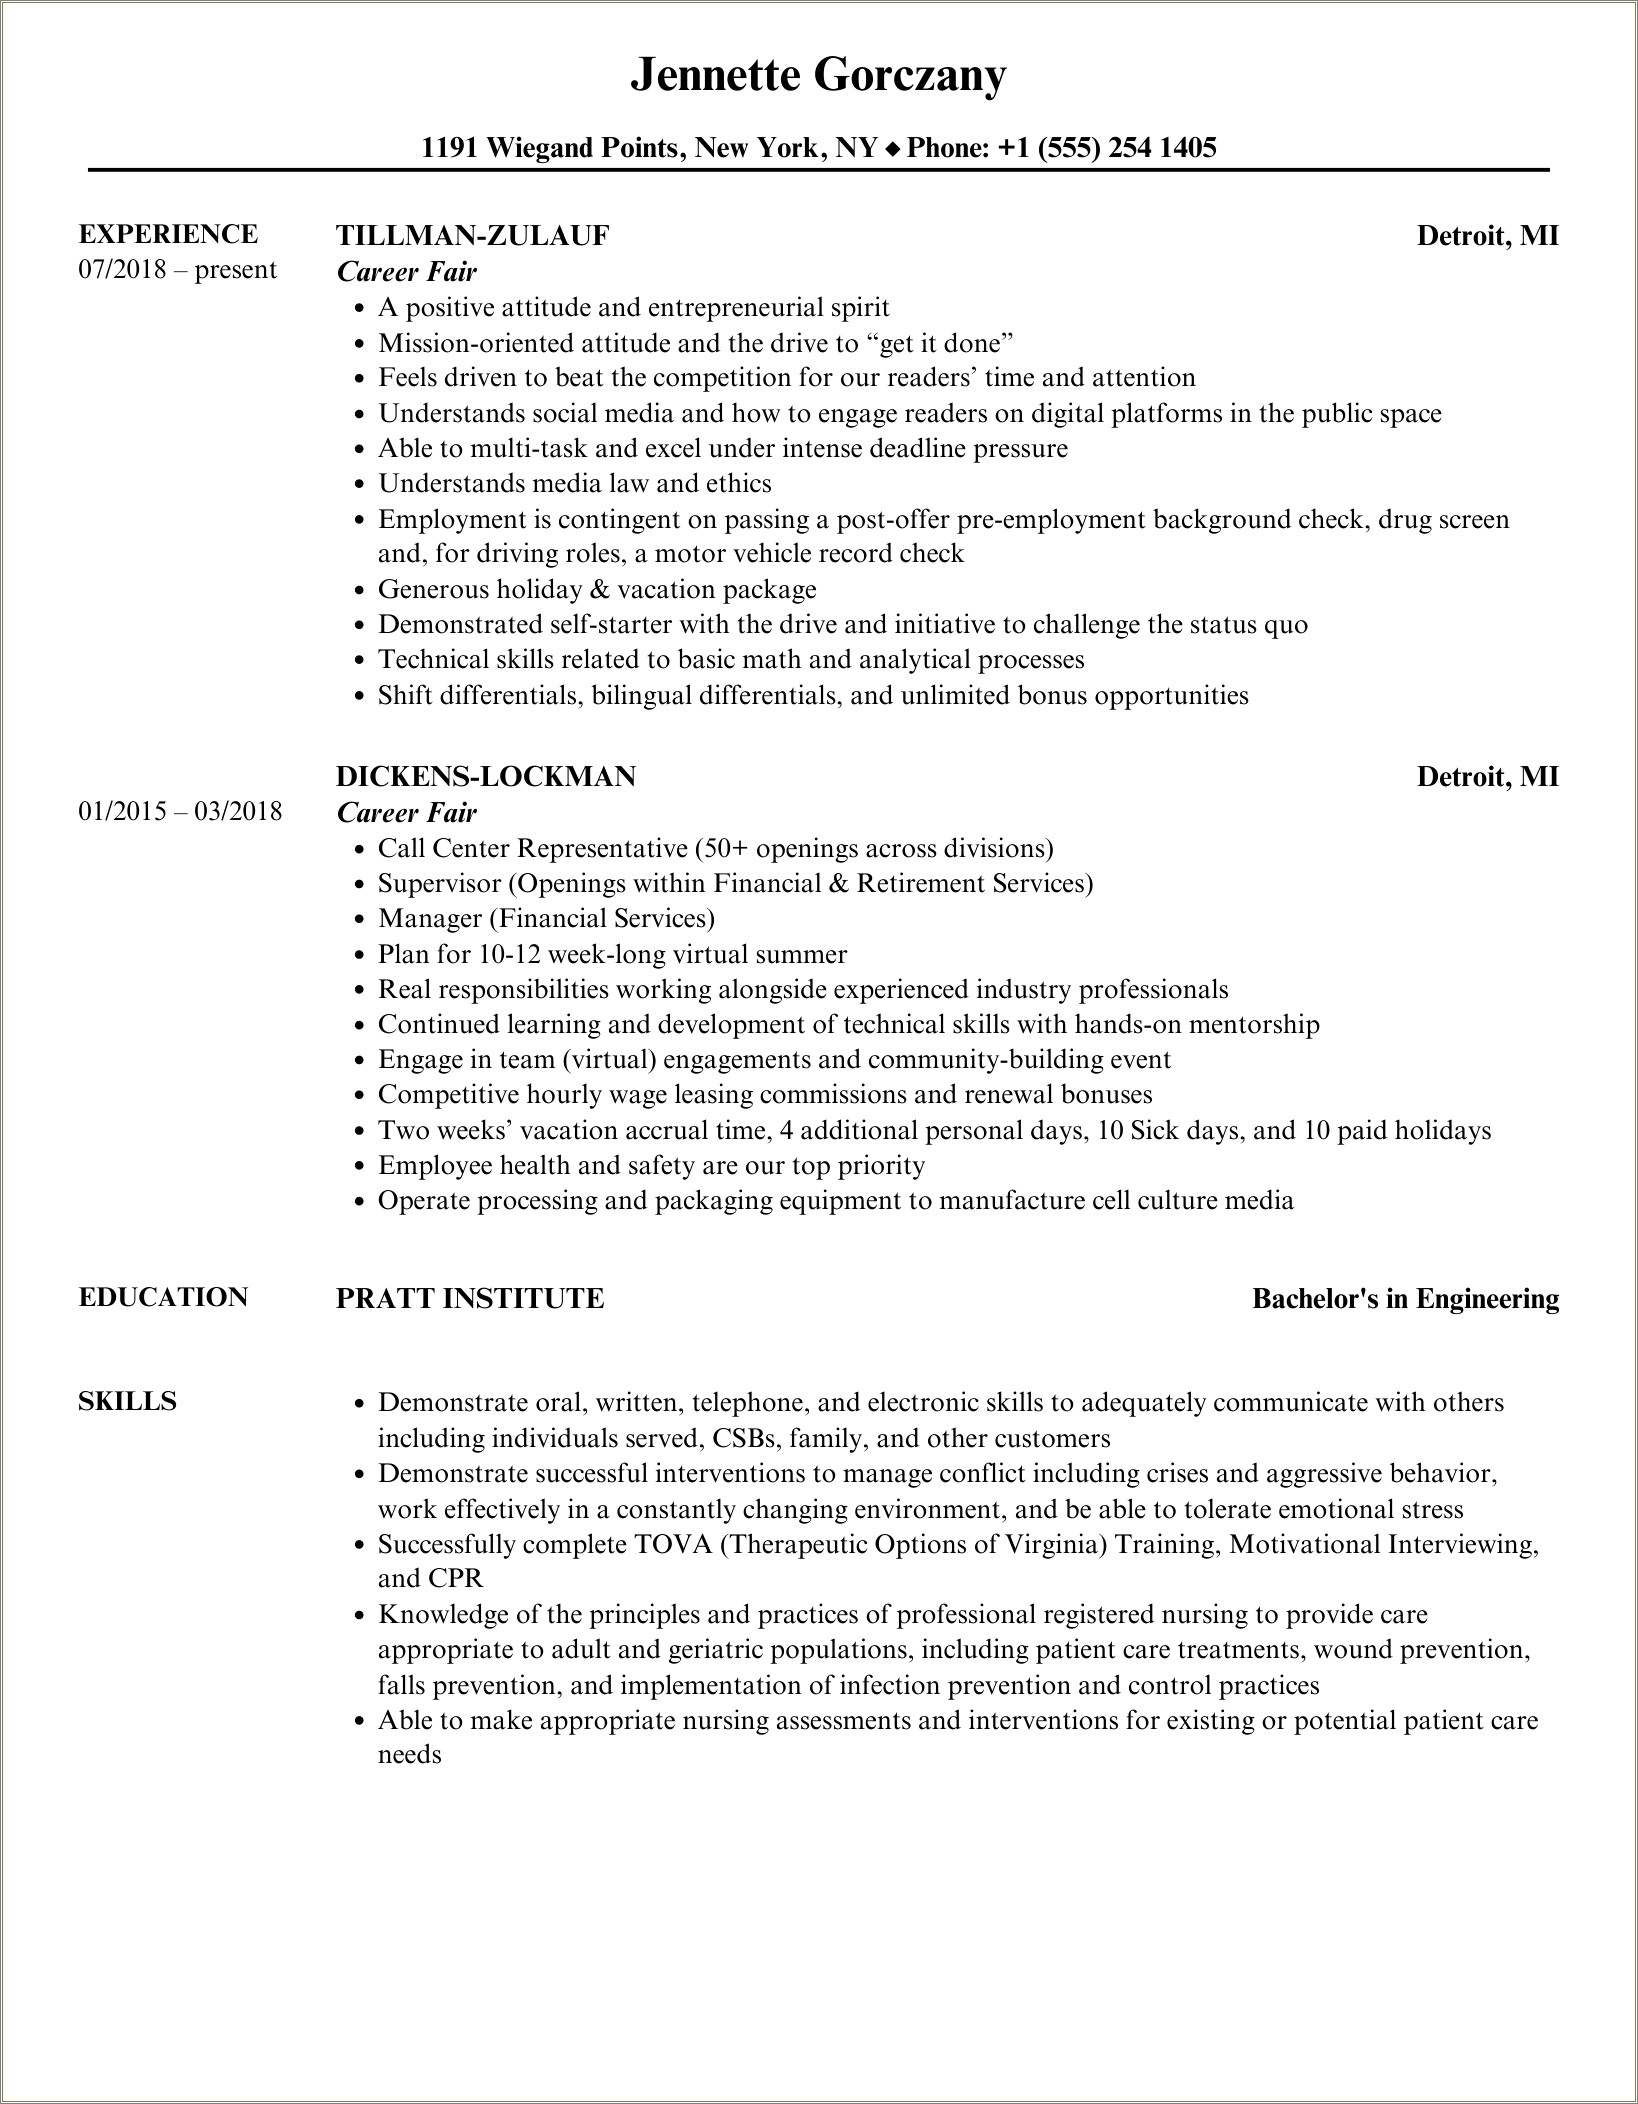 Resume Objective Statement For Job Fair